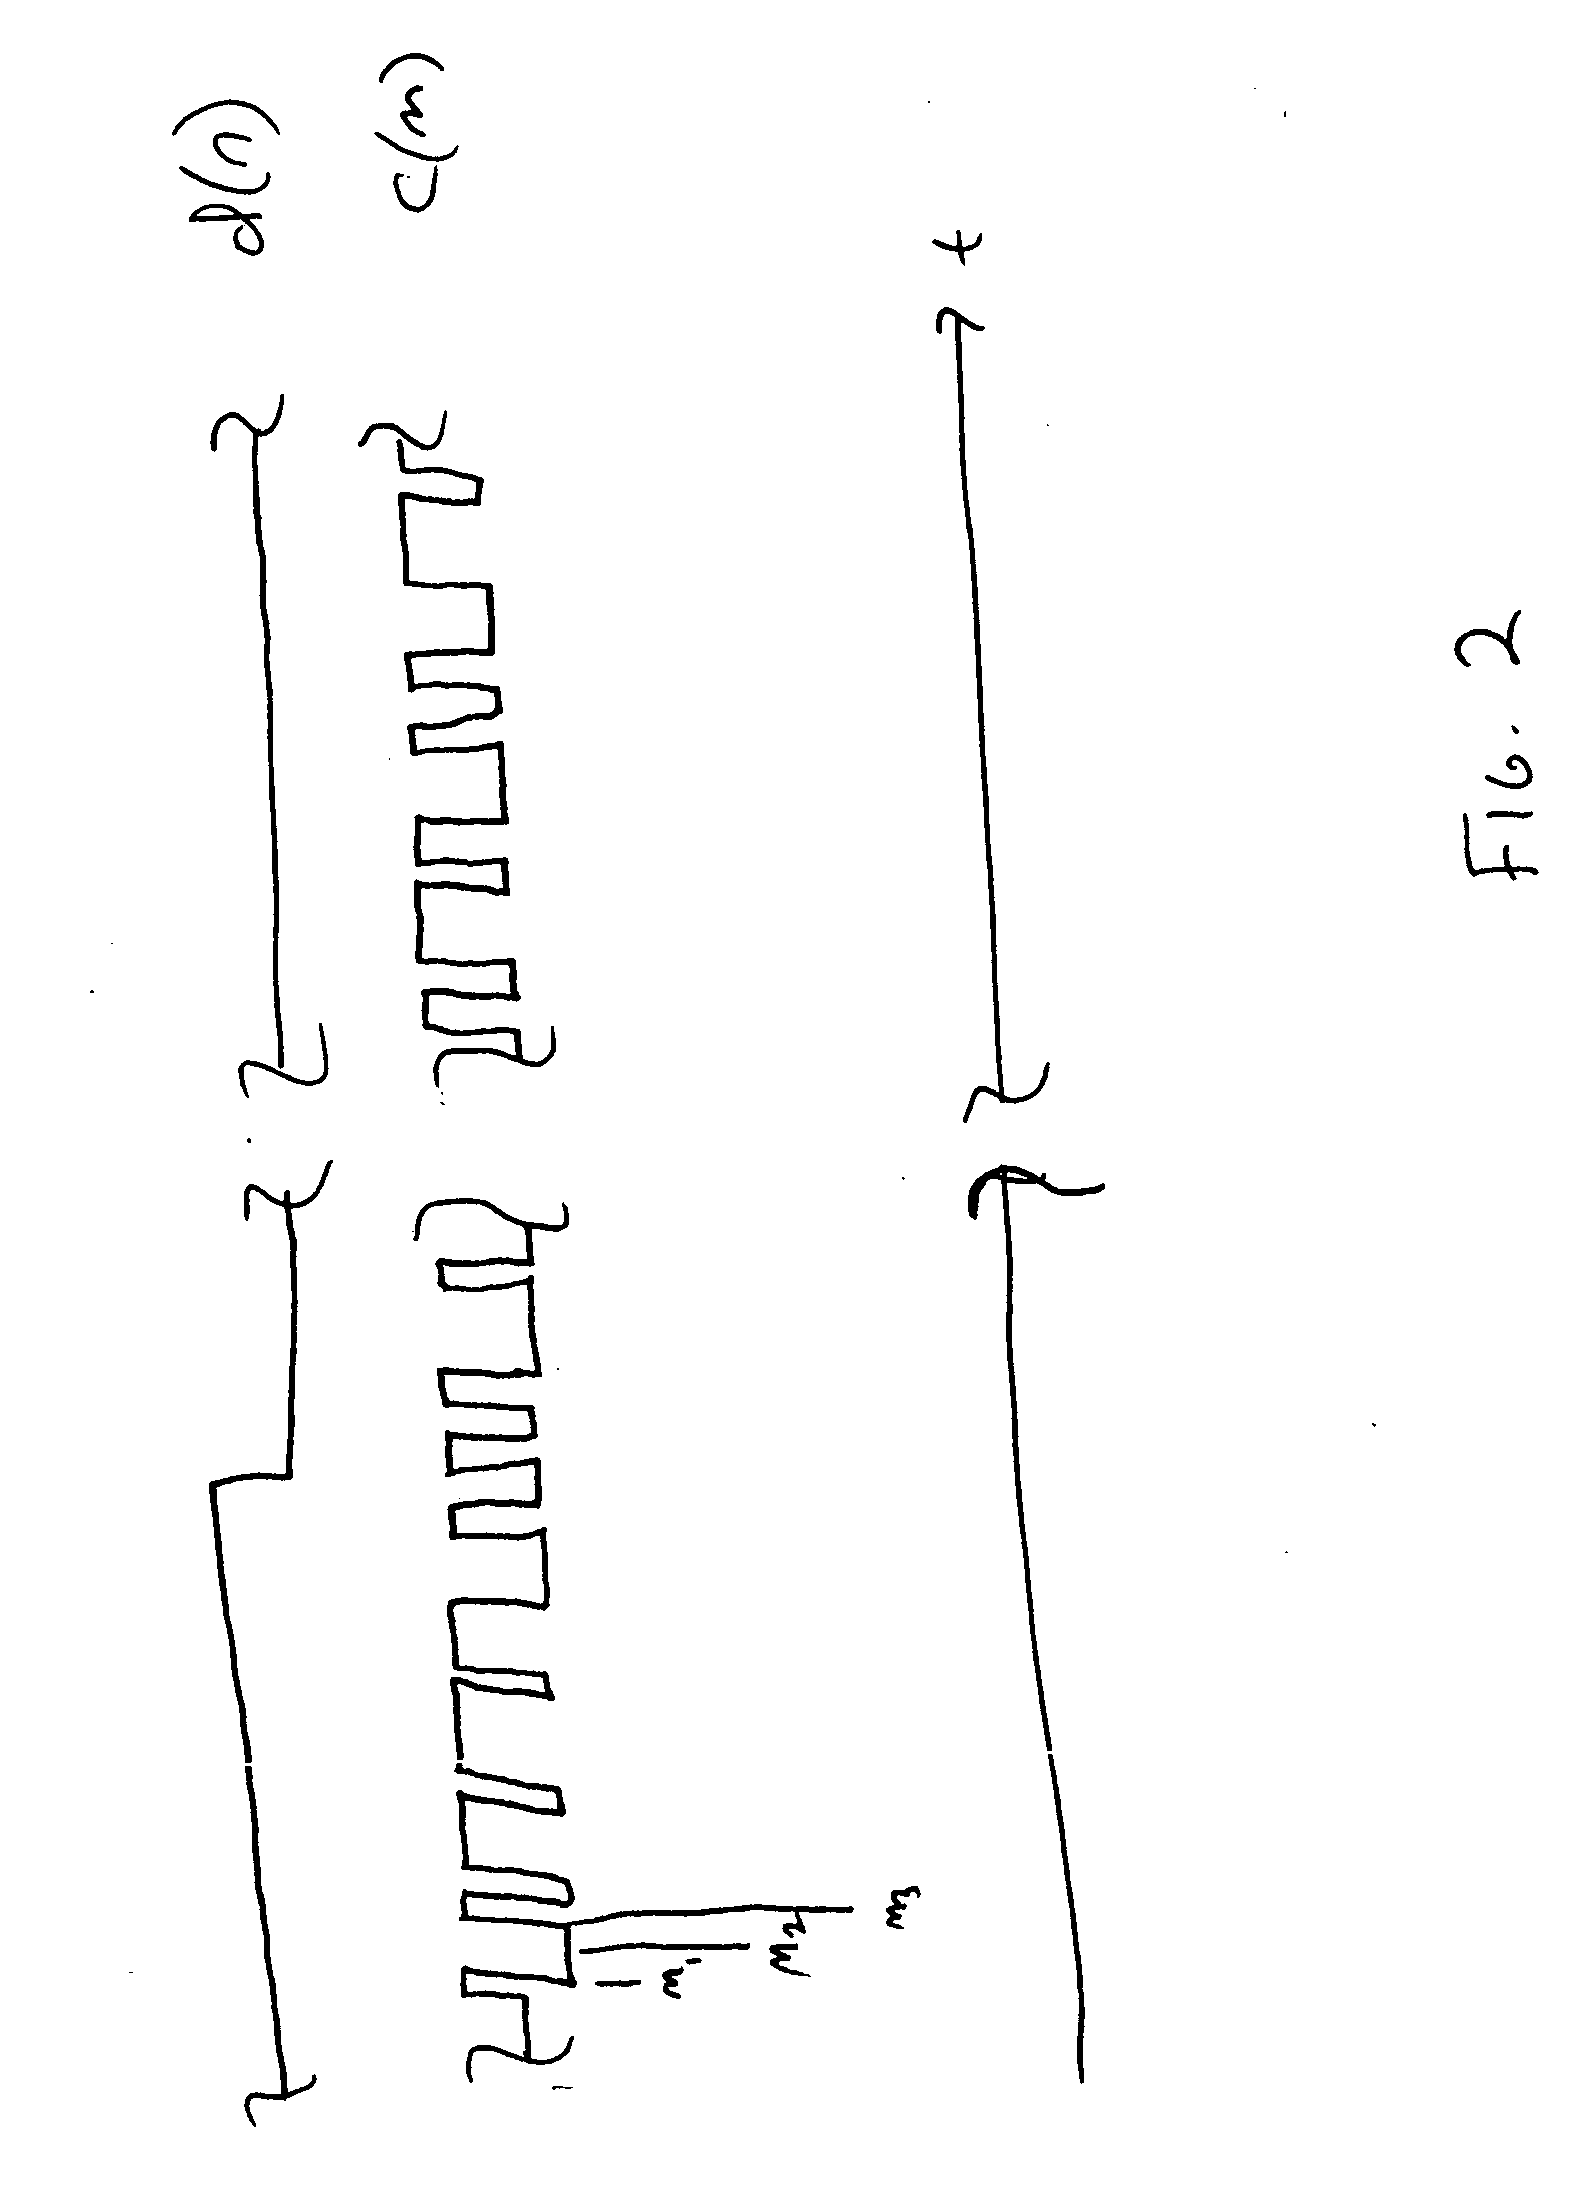 Method and apparatus for detecting and processing GPS signals